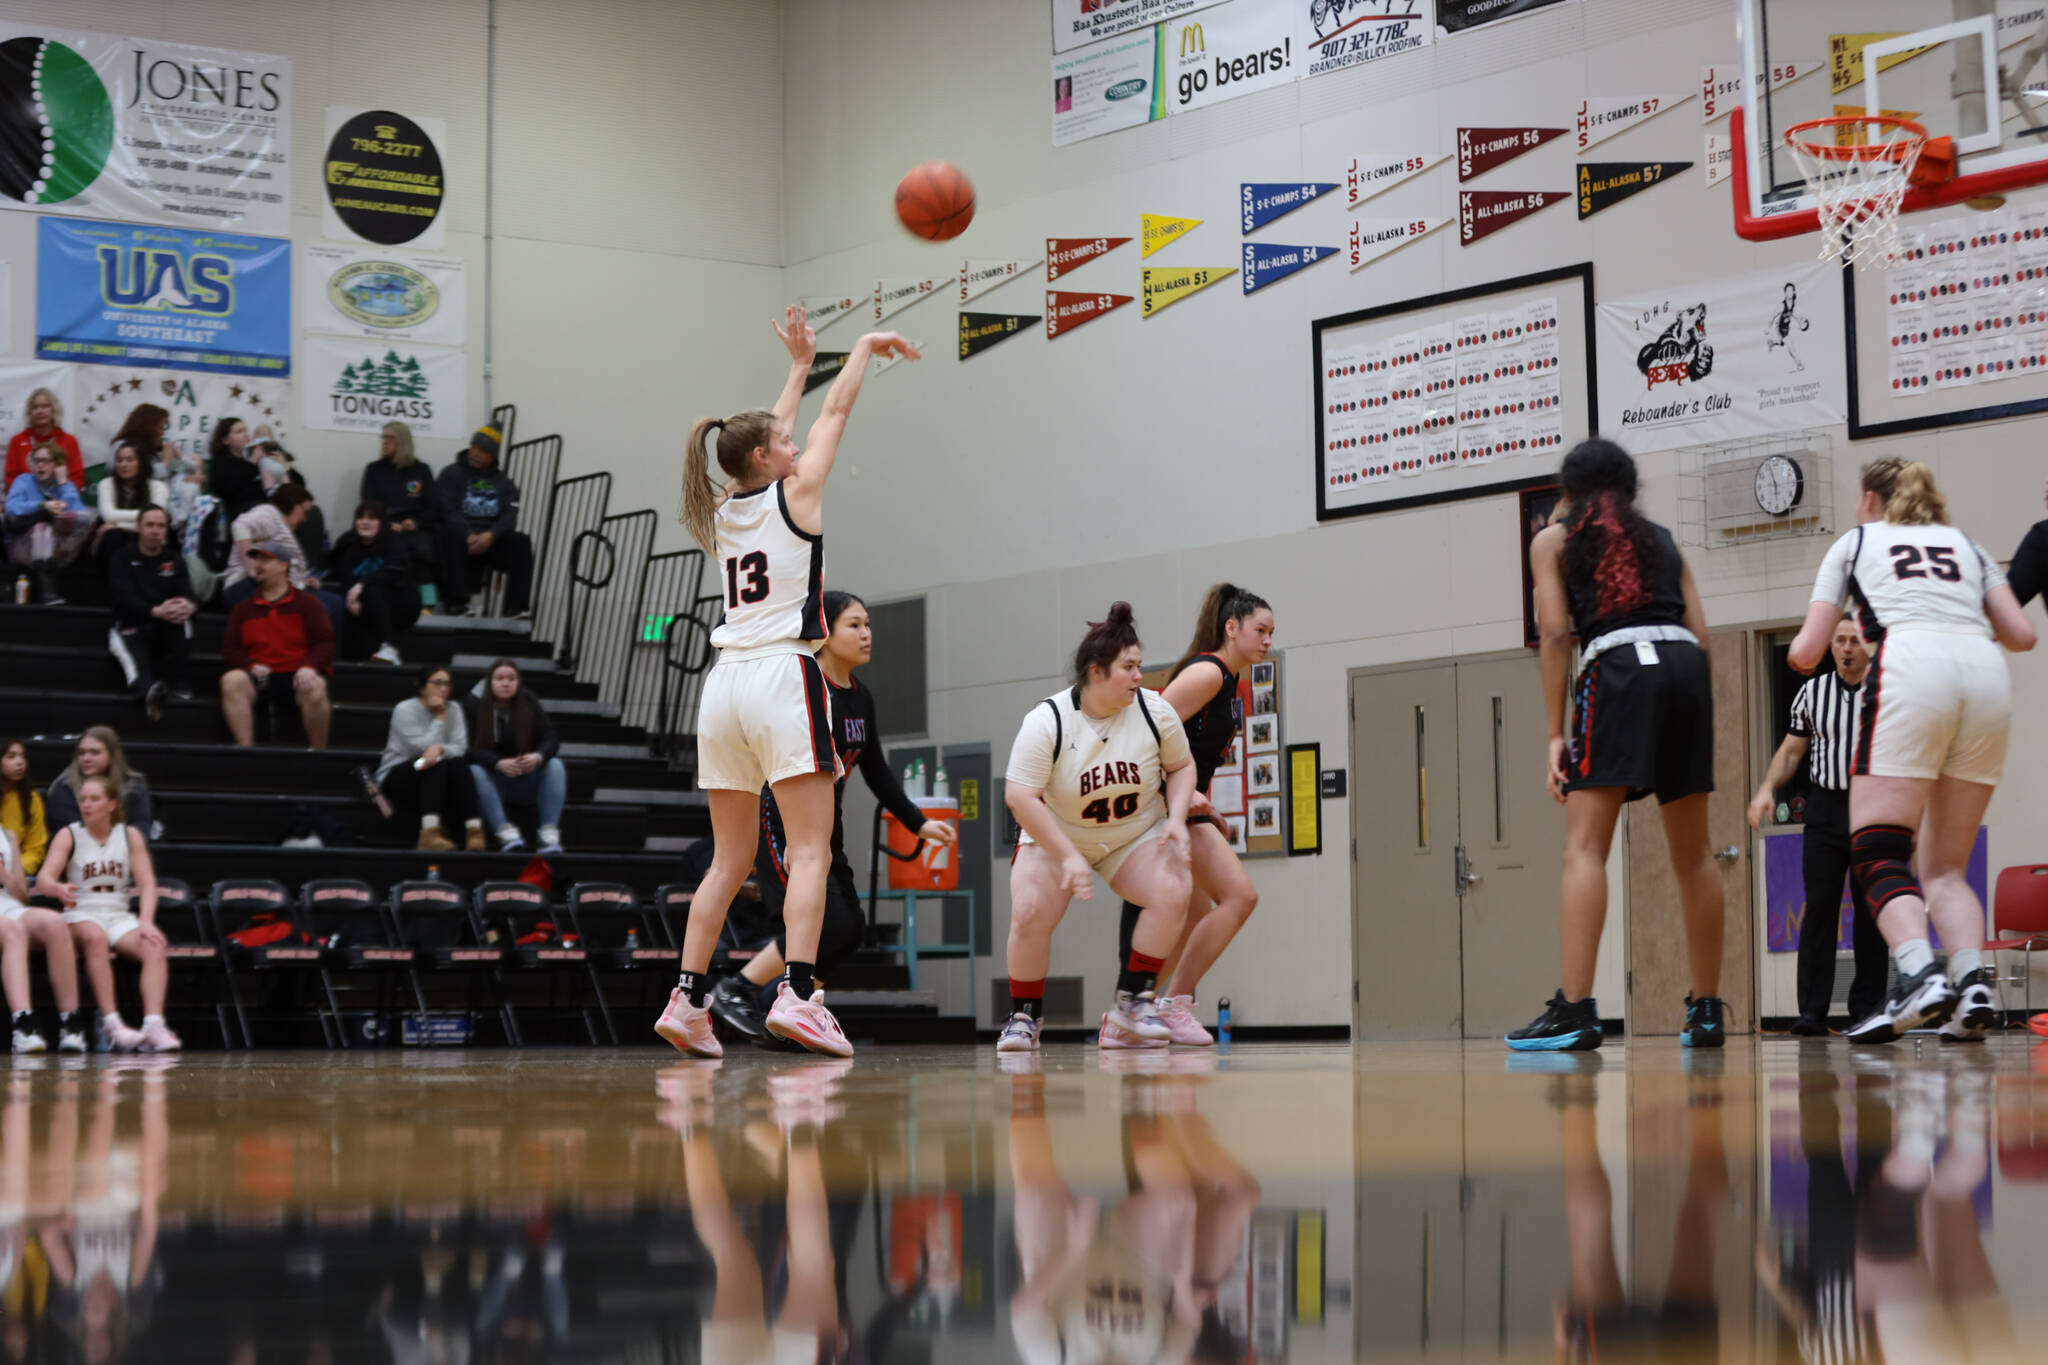 Senior guard Skylar Tuckwood shoots a free throw during Wednesday night’s game against Bettye Davis East Anchorage High School during the first night of the Princess Cruises Capital City Classic. (Clarise Larson / Juneau Empire)